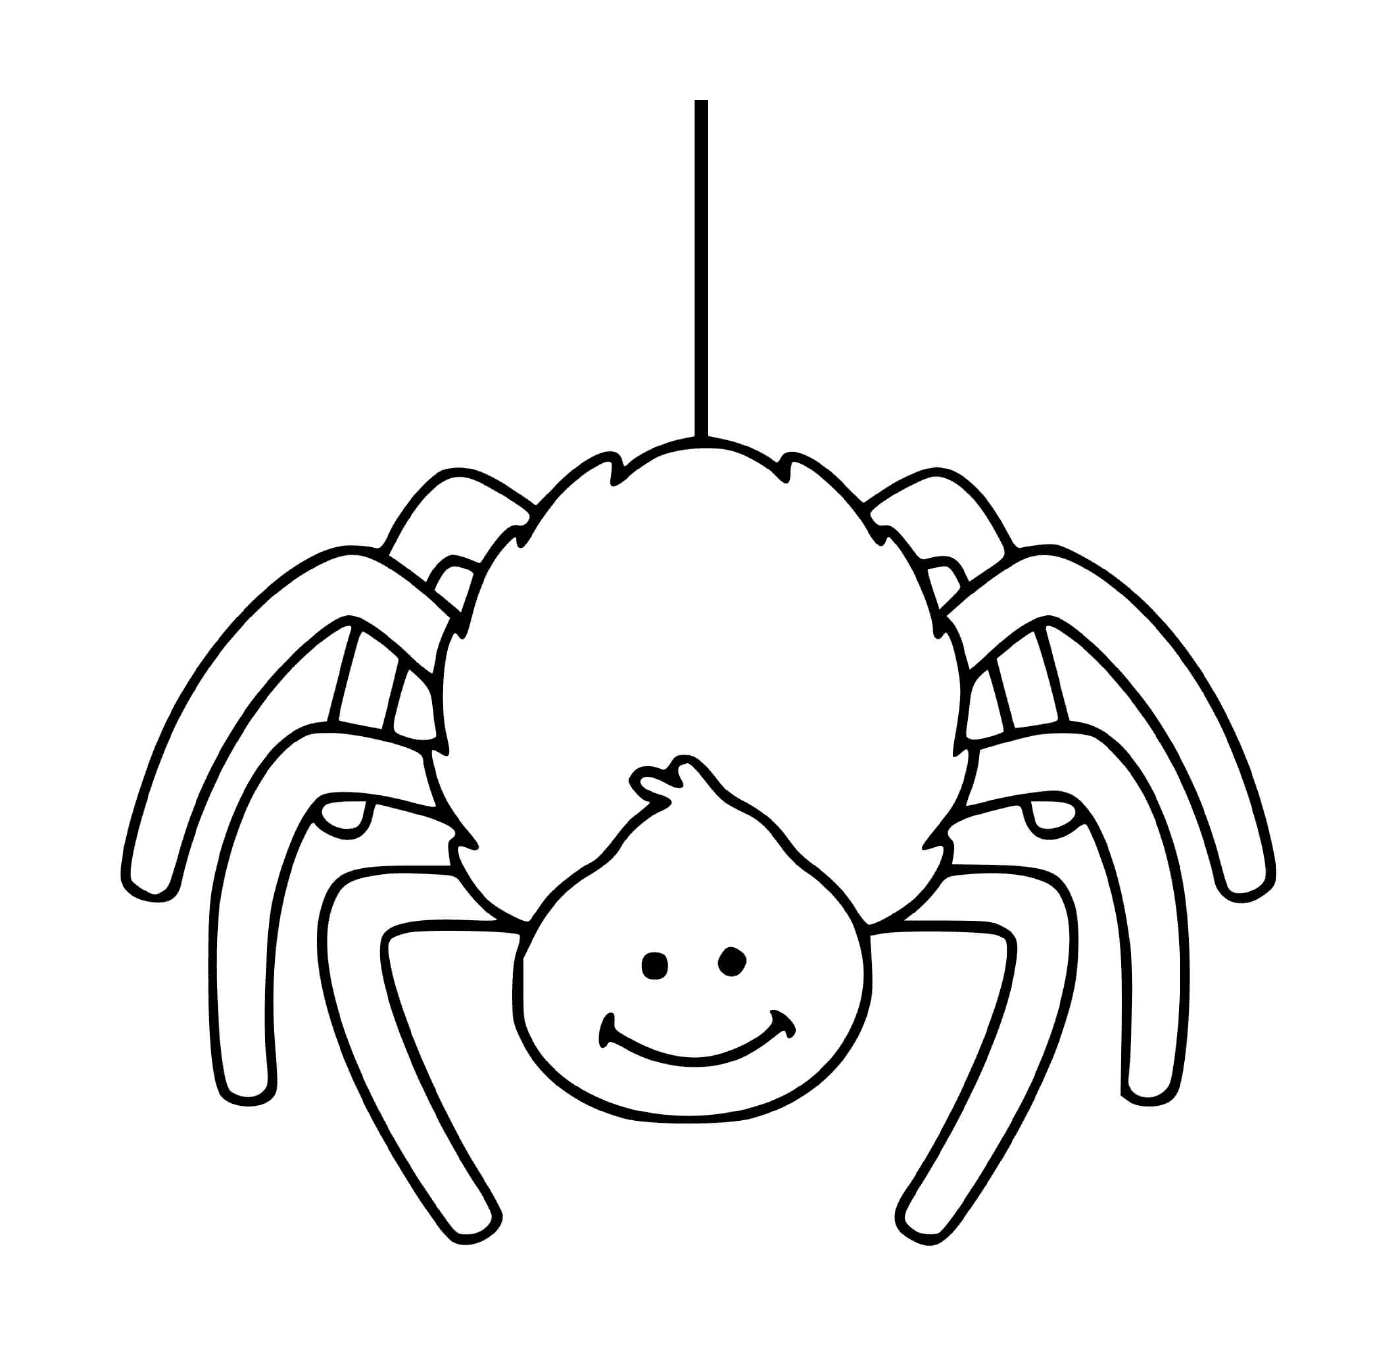  An easy spider 